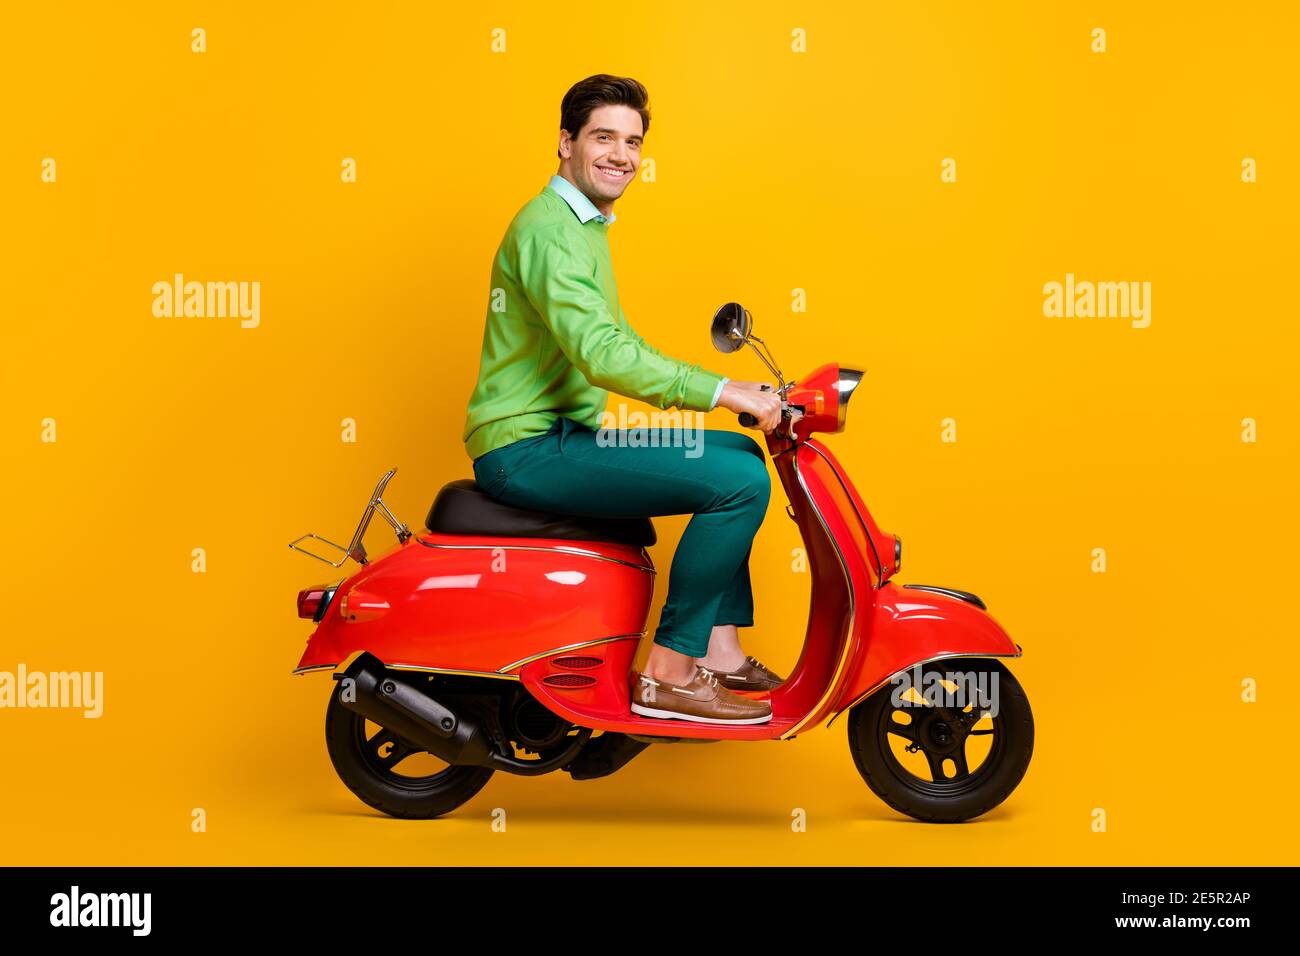 Full body profile portrait of young moped driver toothy smile wear ...